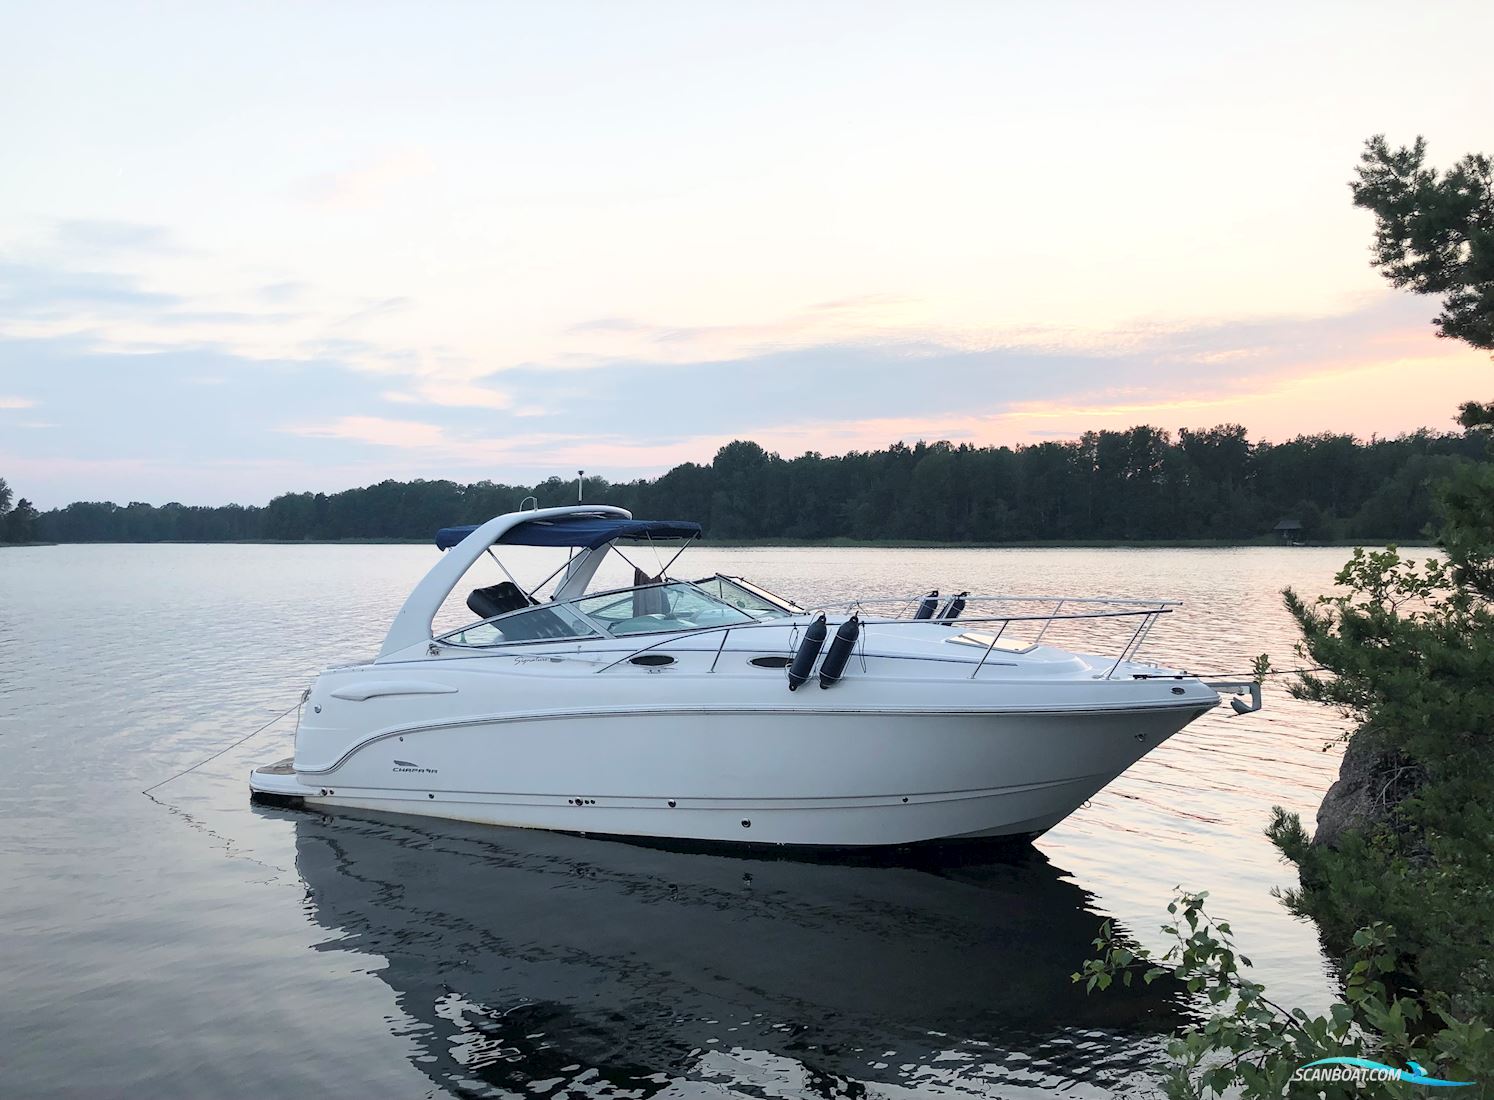 Chaparral 270 Signature Motor boat 2003, with 2 x Volvo Penta 4.3 Gxi-D engine, Sweden